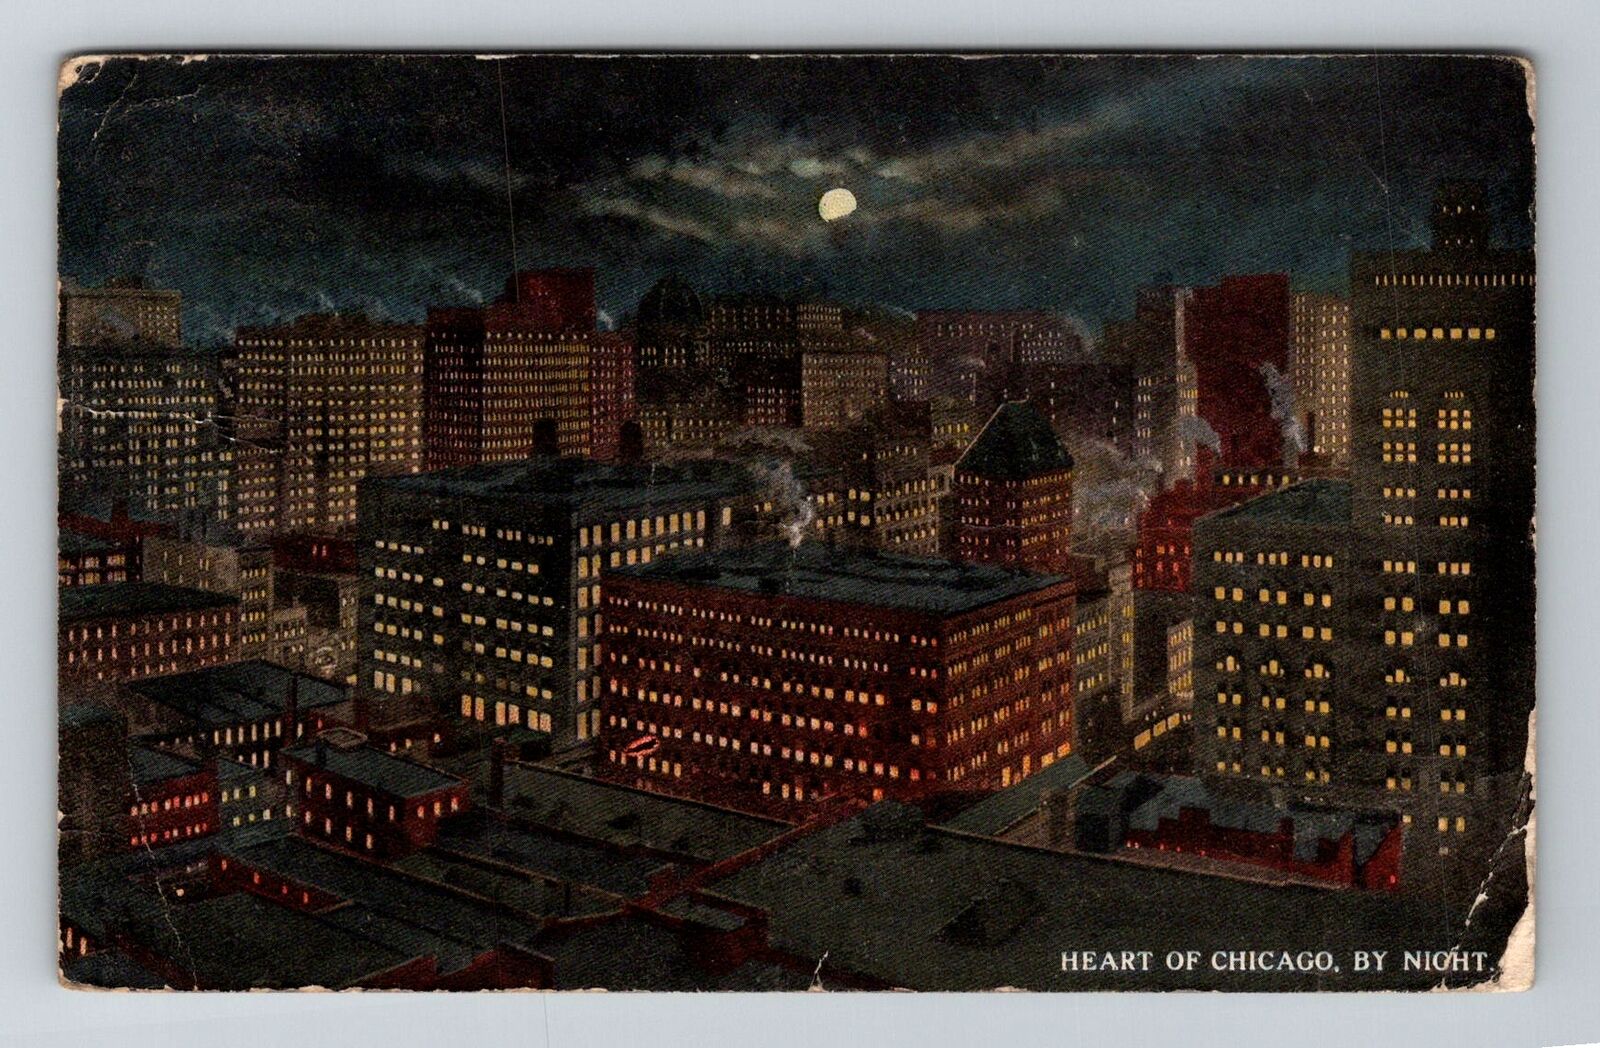 Chicago IL-Illinois, Aerial Of Heart Of Chicago By Night Vintage c1916 Postcard